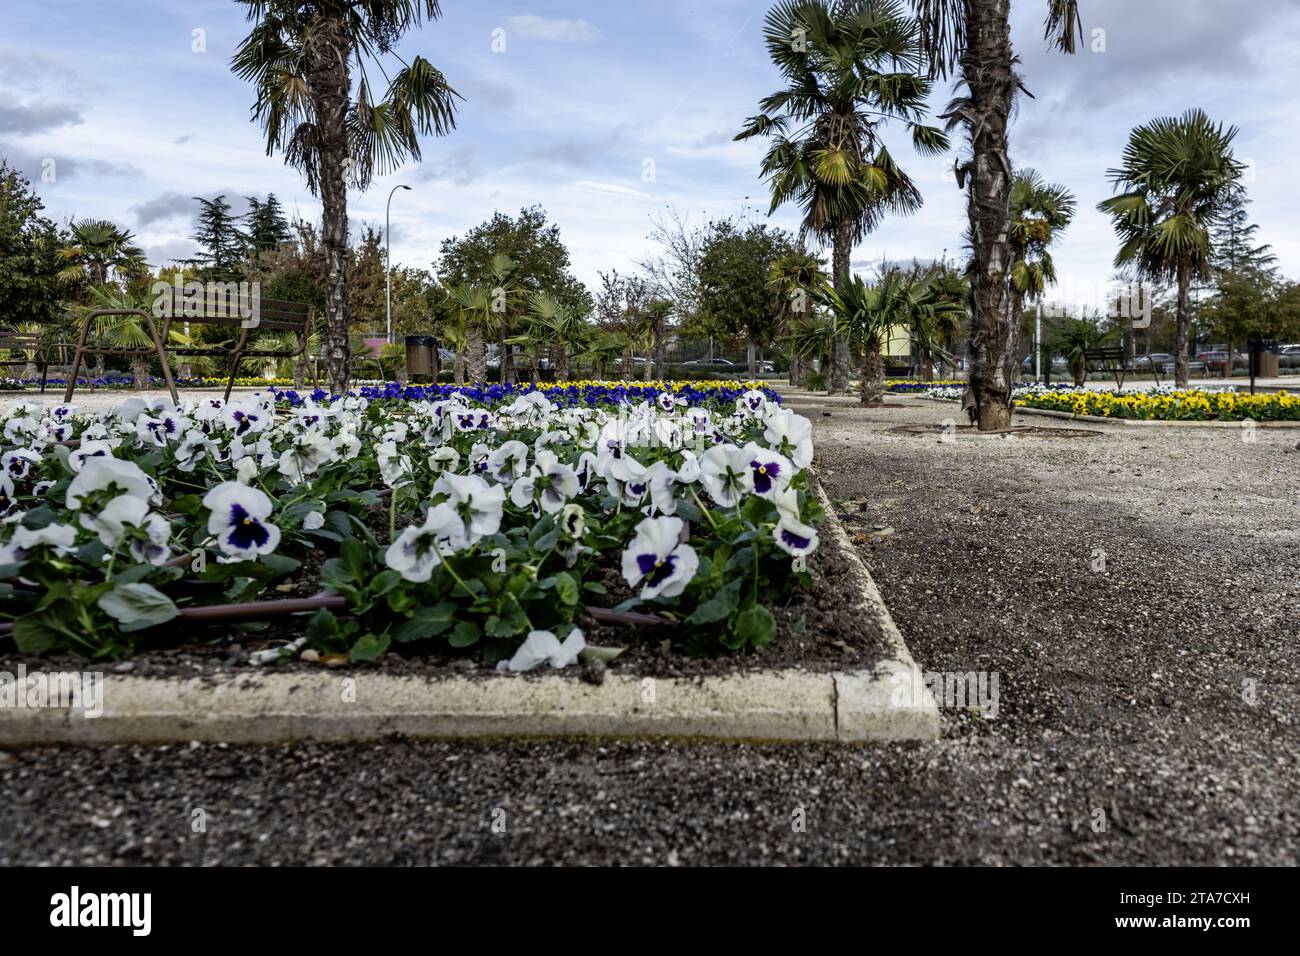 flower beds of different colors with white ones in the foreground Stock Photo